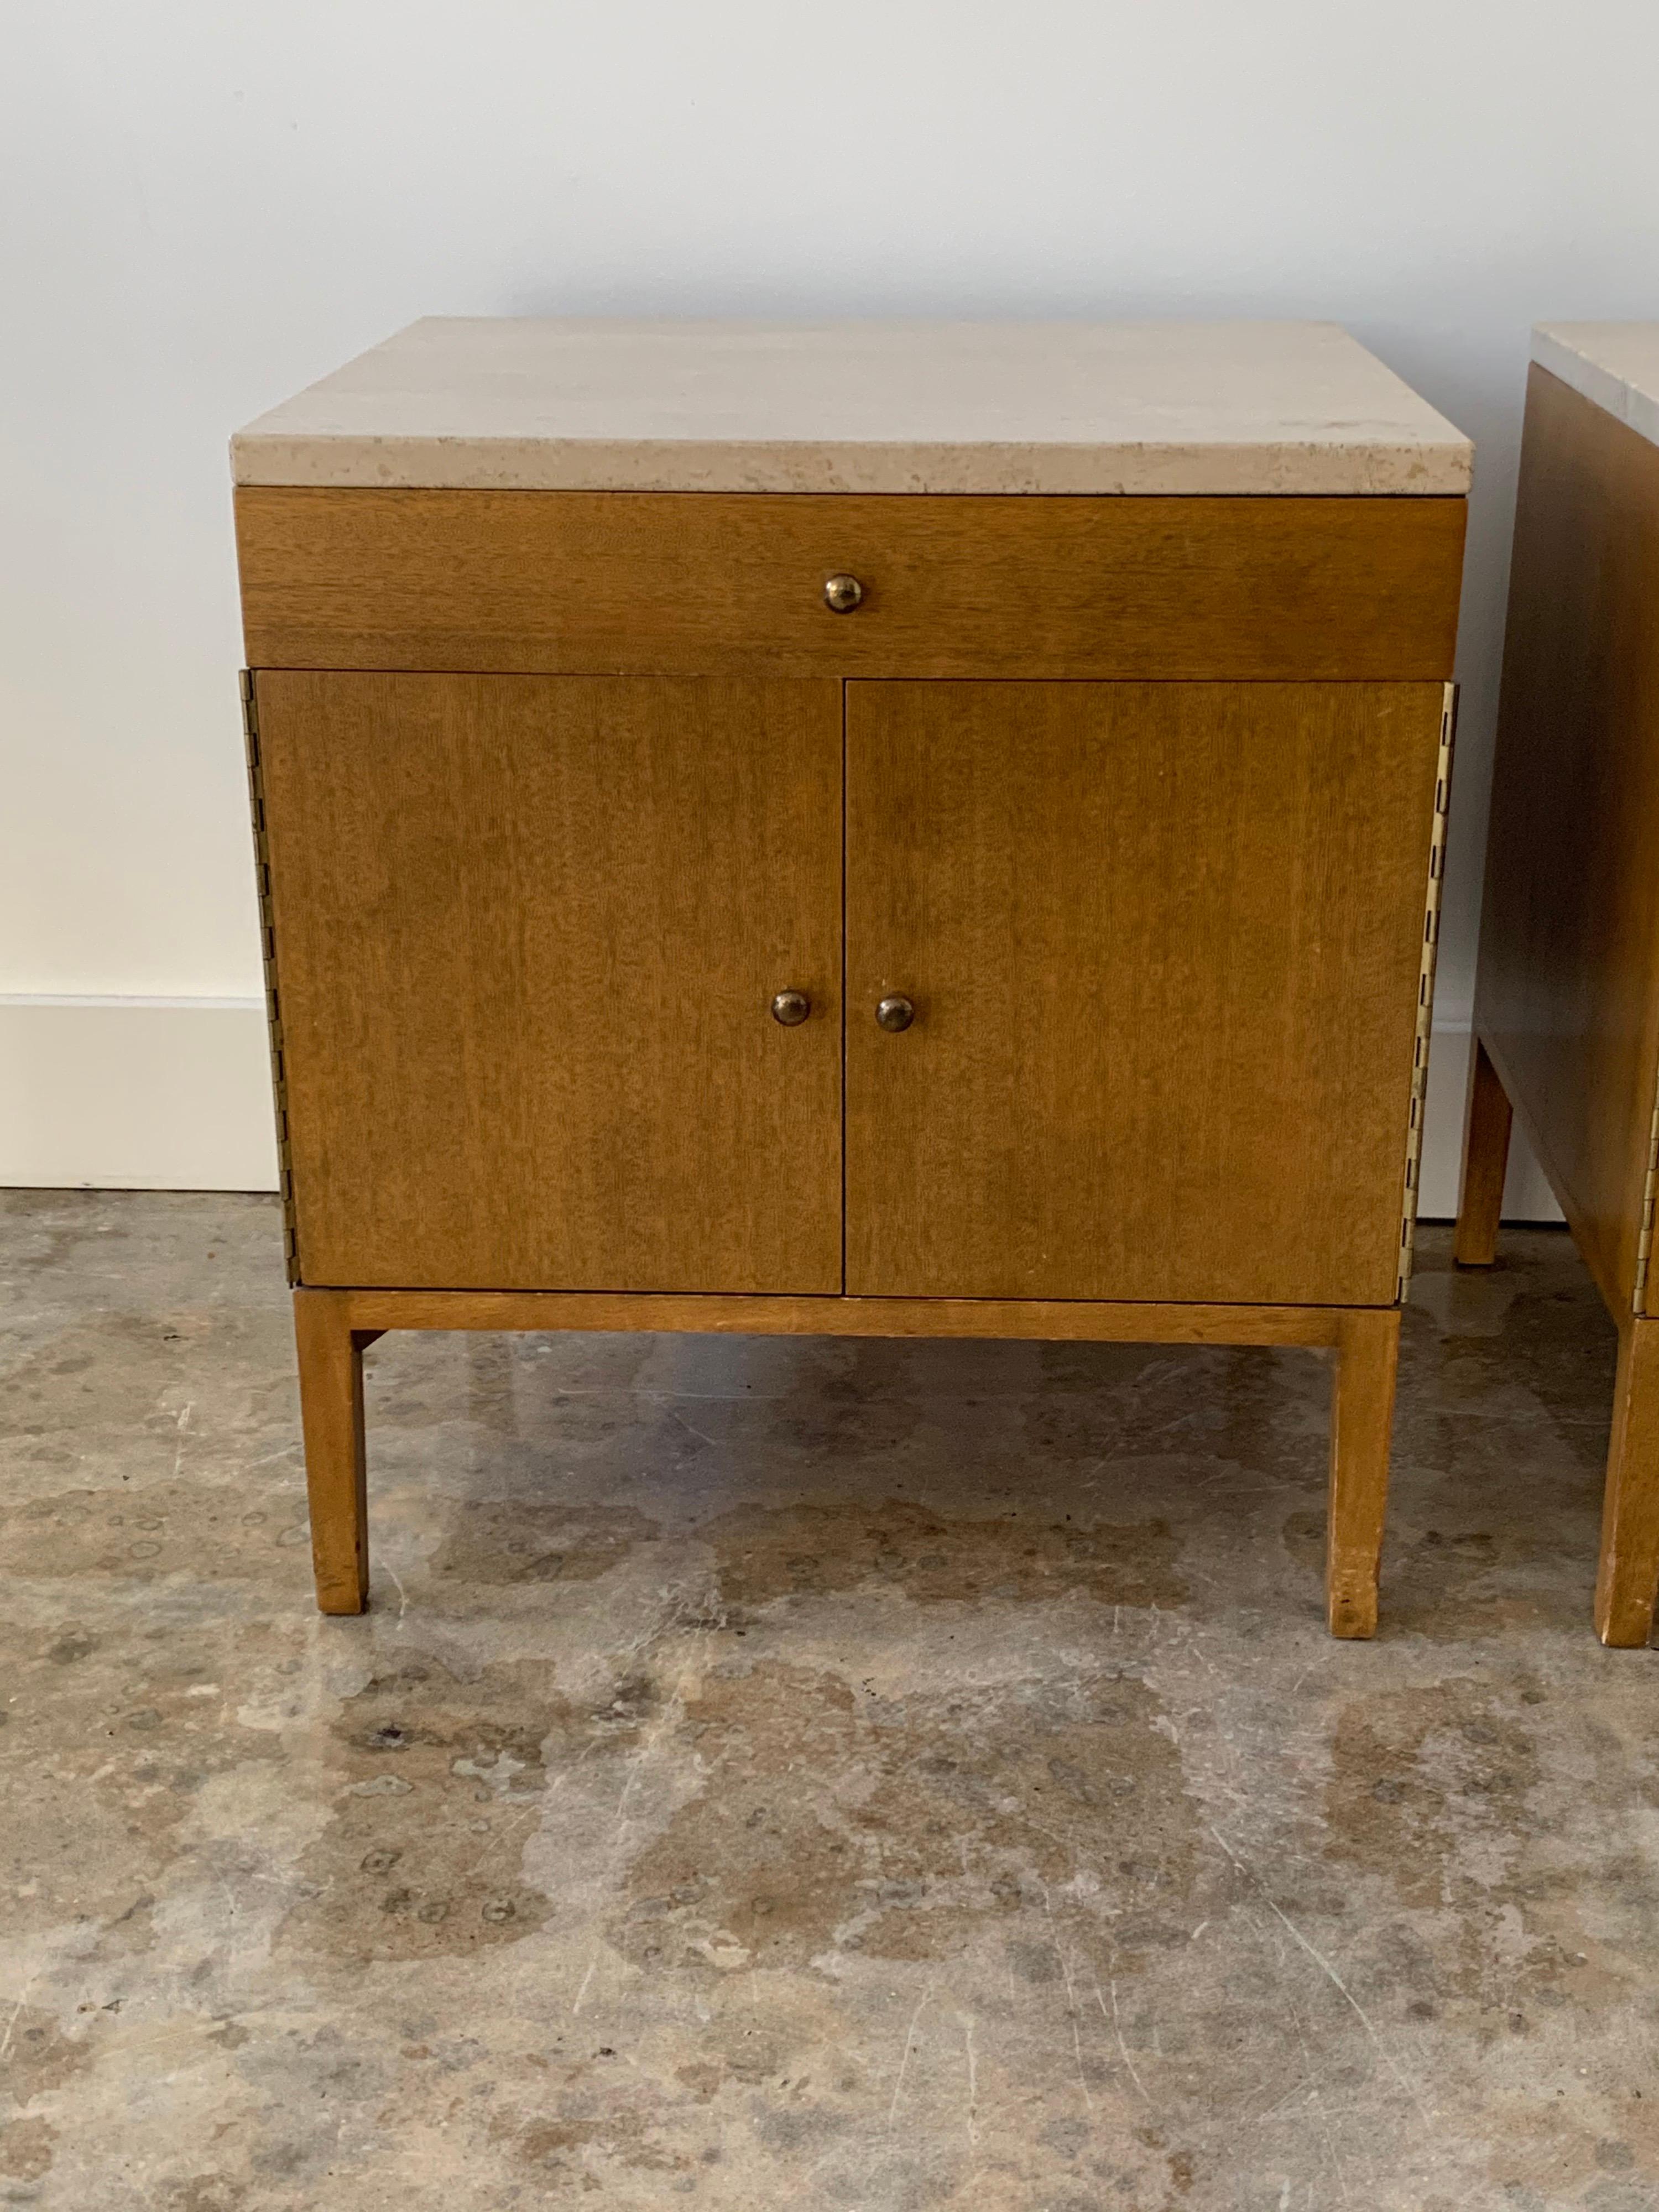 Mid-Century Modern pair of night tables designed by Paul McCobb, from the Irwin Collection for Calvin Furniture of Grand Rapids, circa 1960. Solid walnut with Italian travertine tops. Solid brass hinges and knobs.
Tables have a top drawer above a